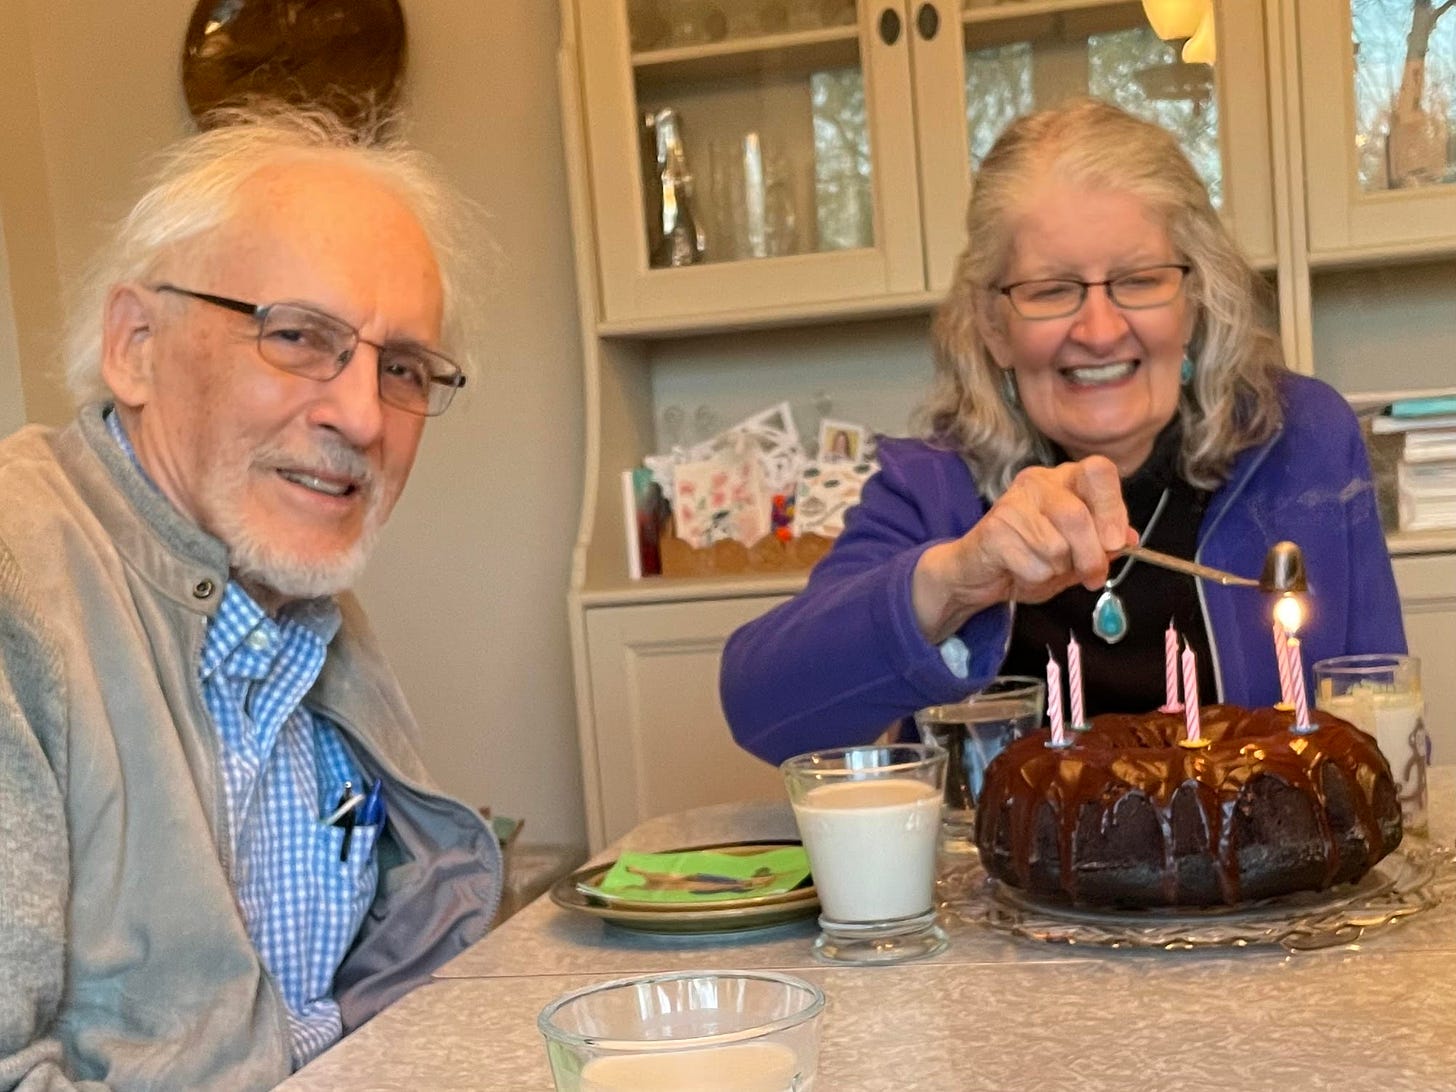 Mom snuffing out candles on her birthday cake, age 79, with Dad at her side